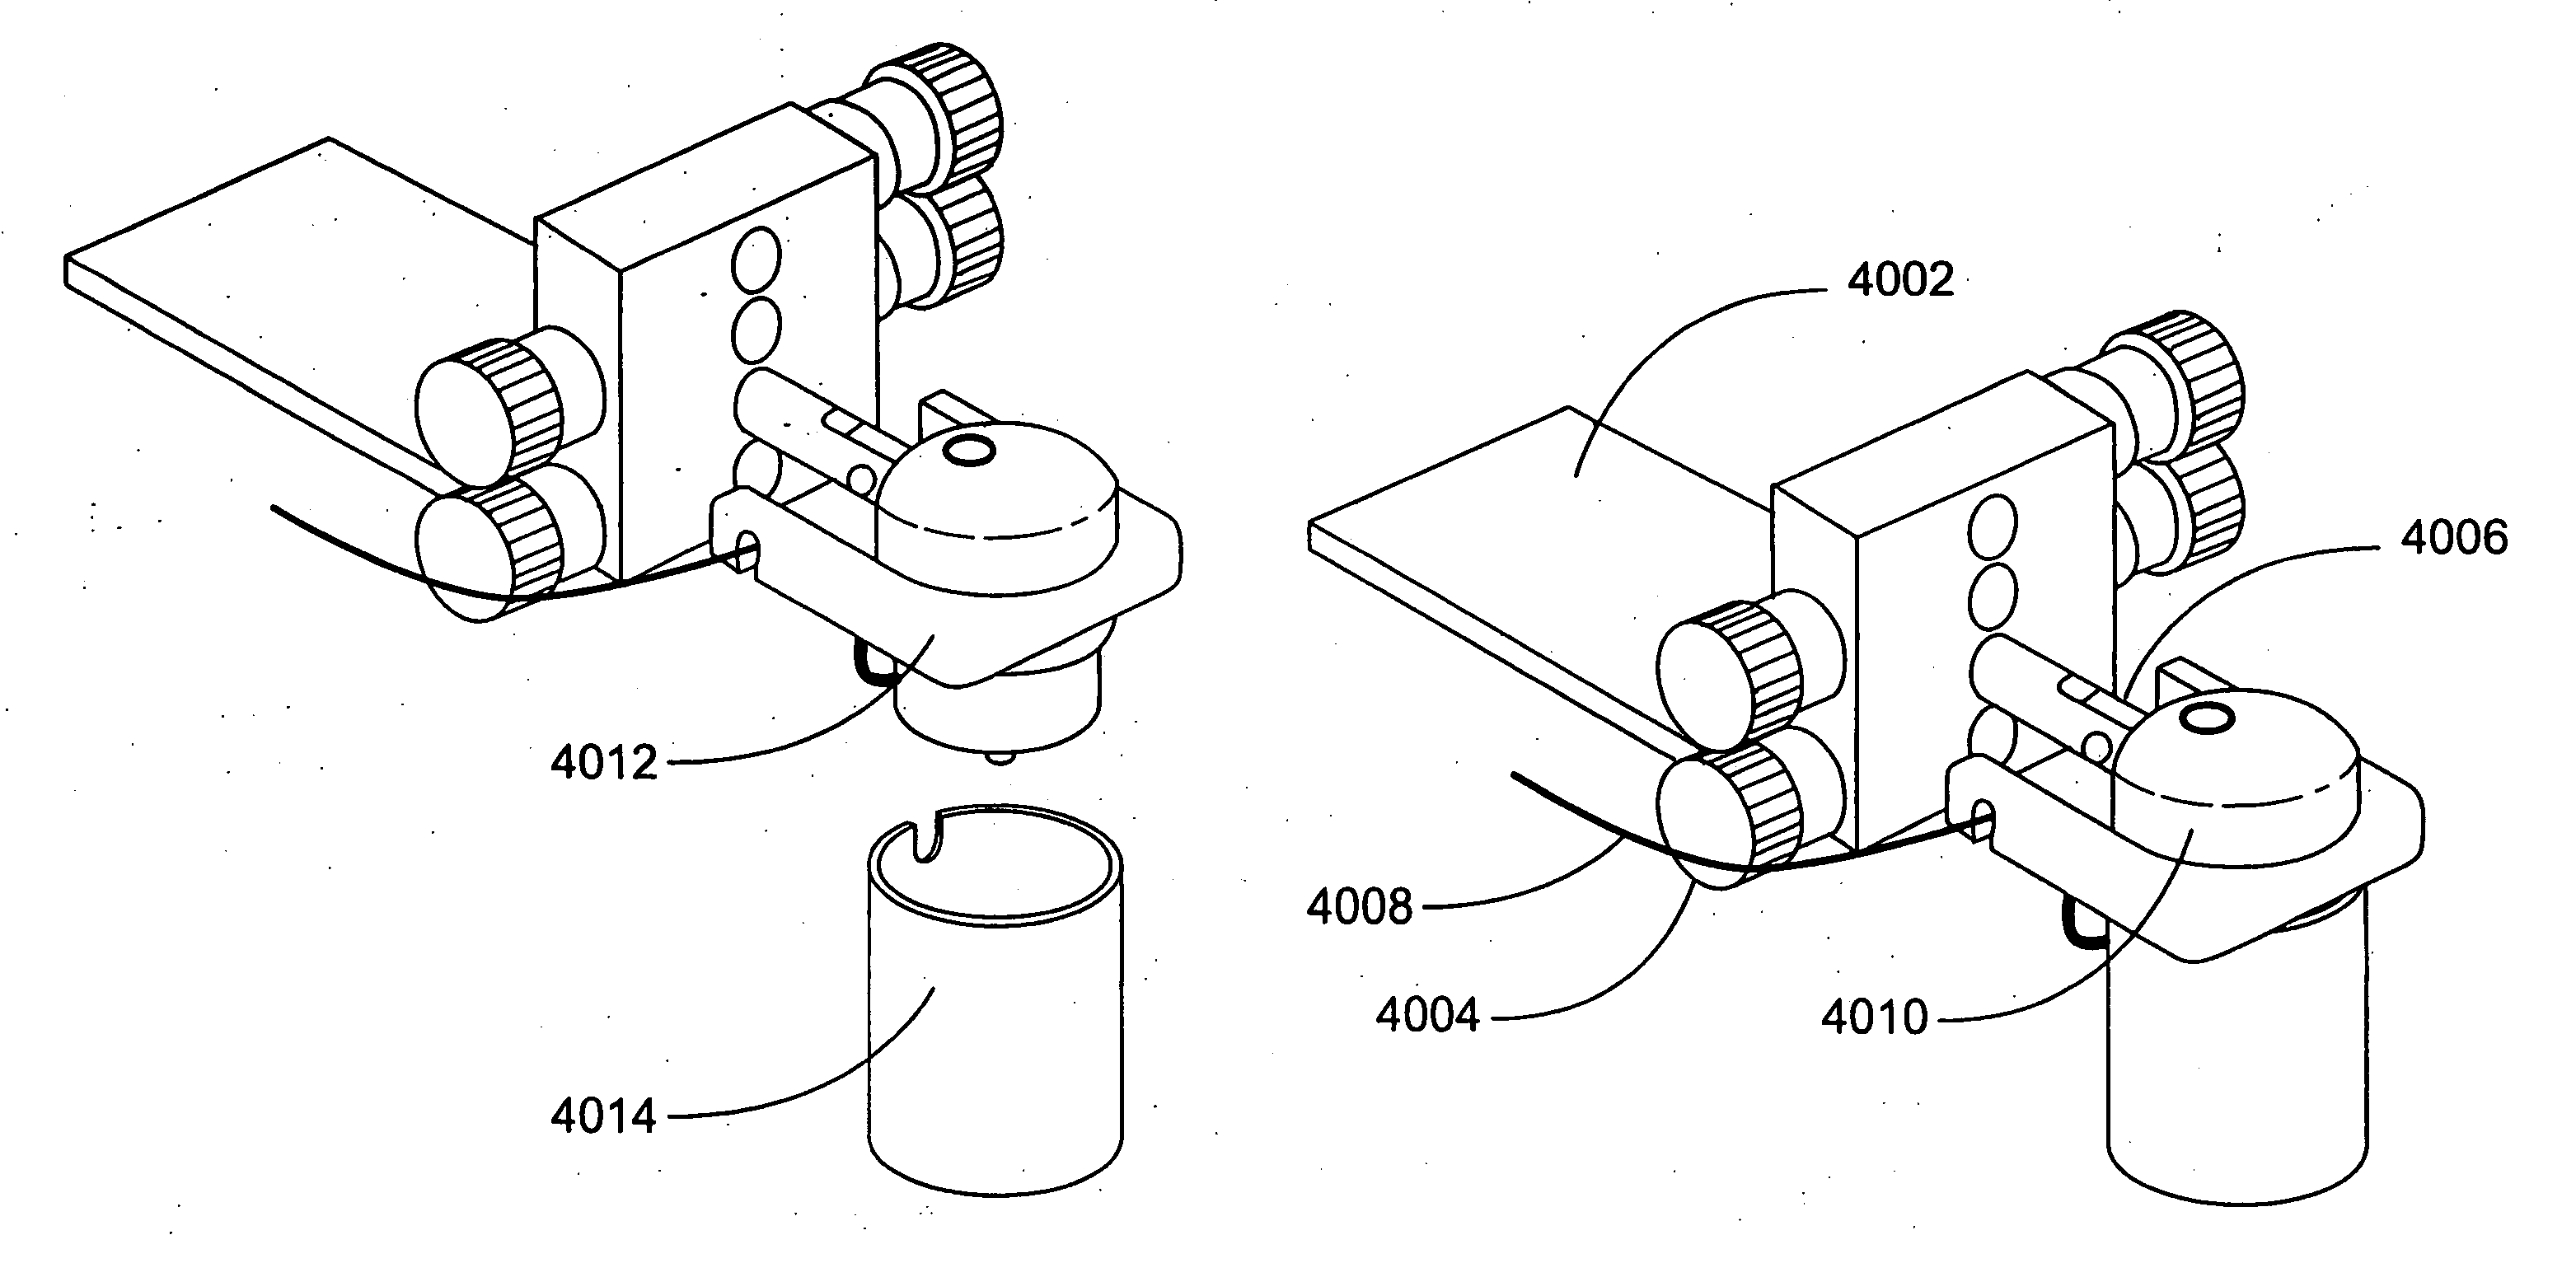 Method and apparatus for monitoring eye tremor